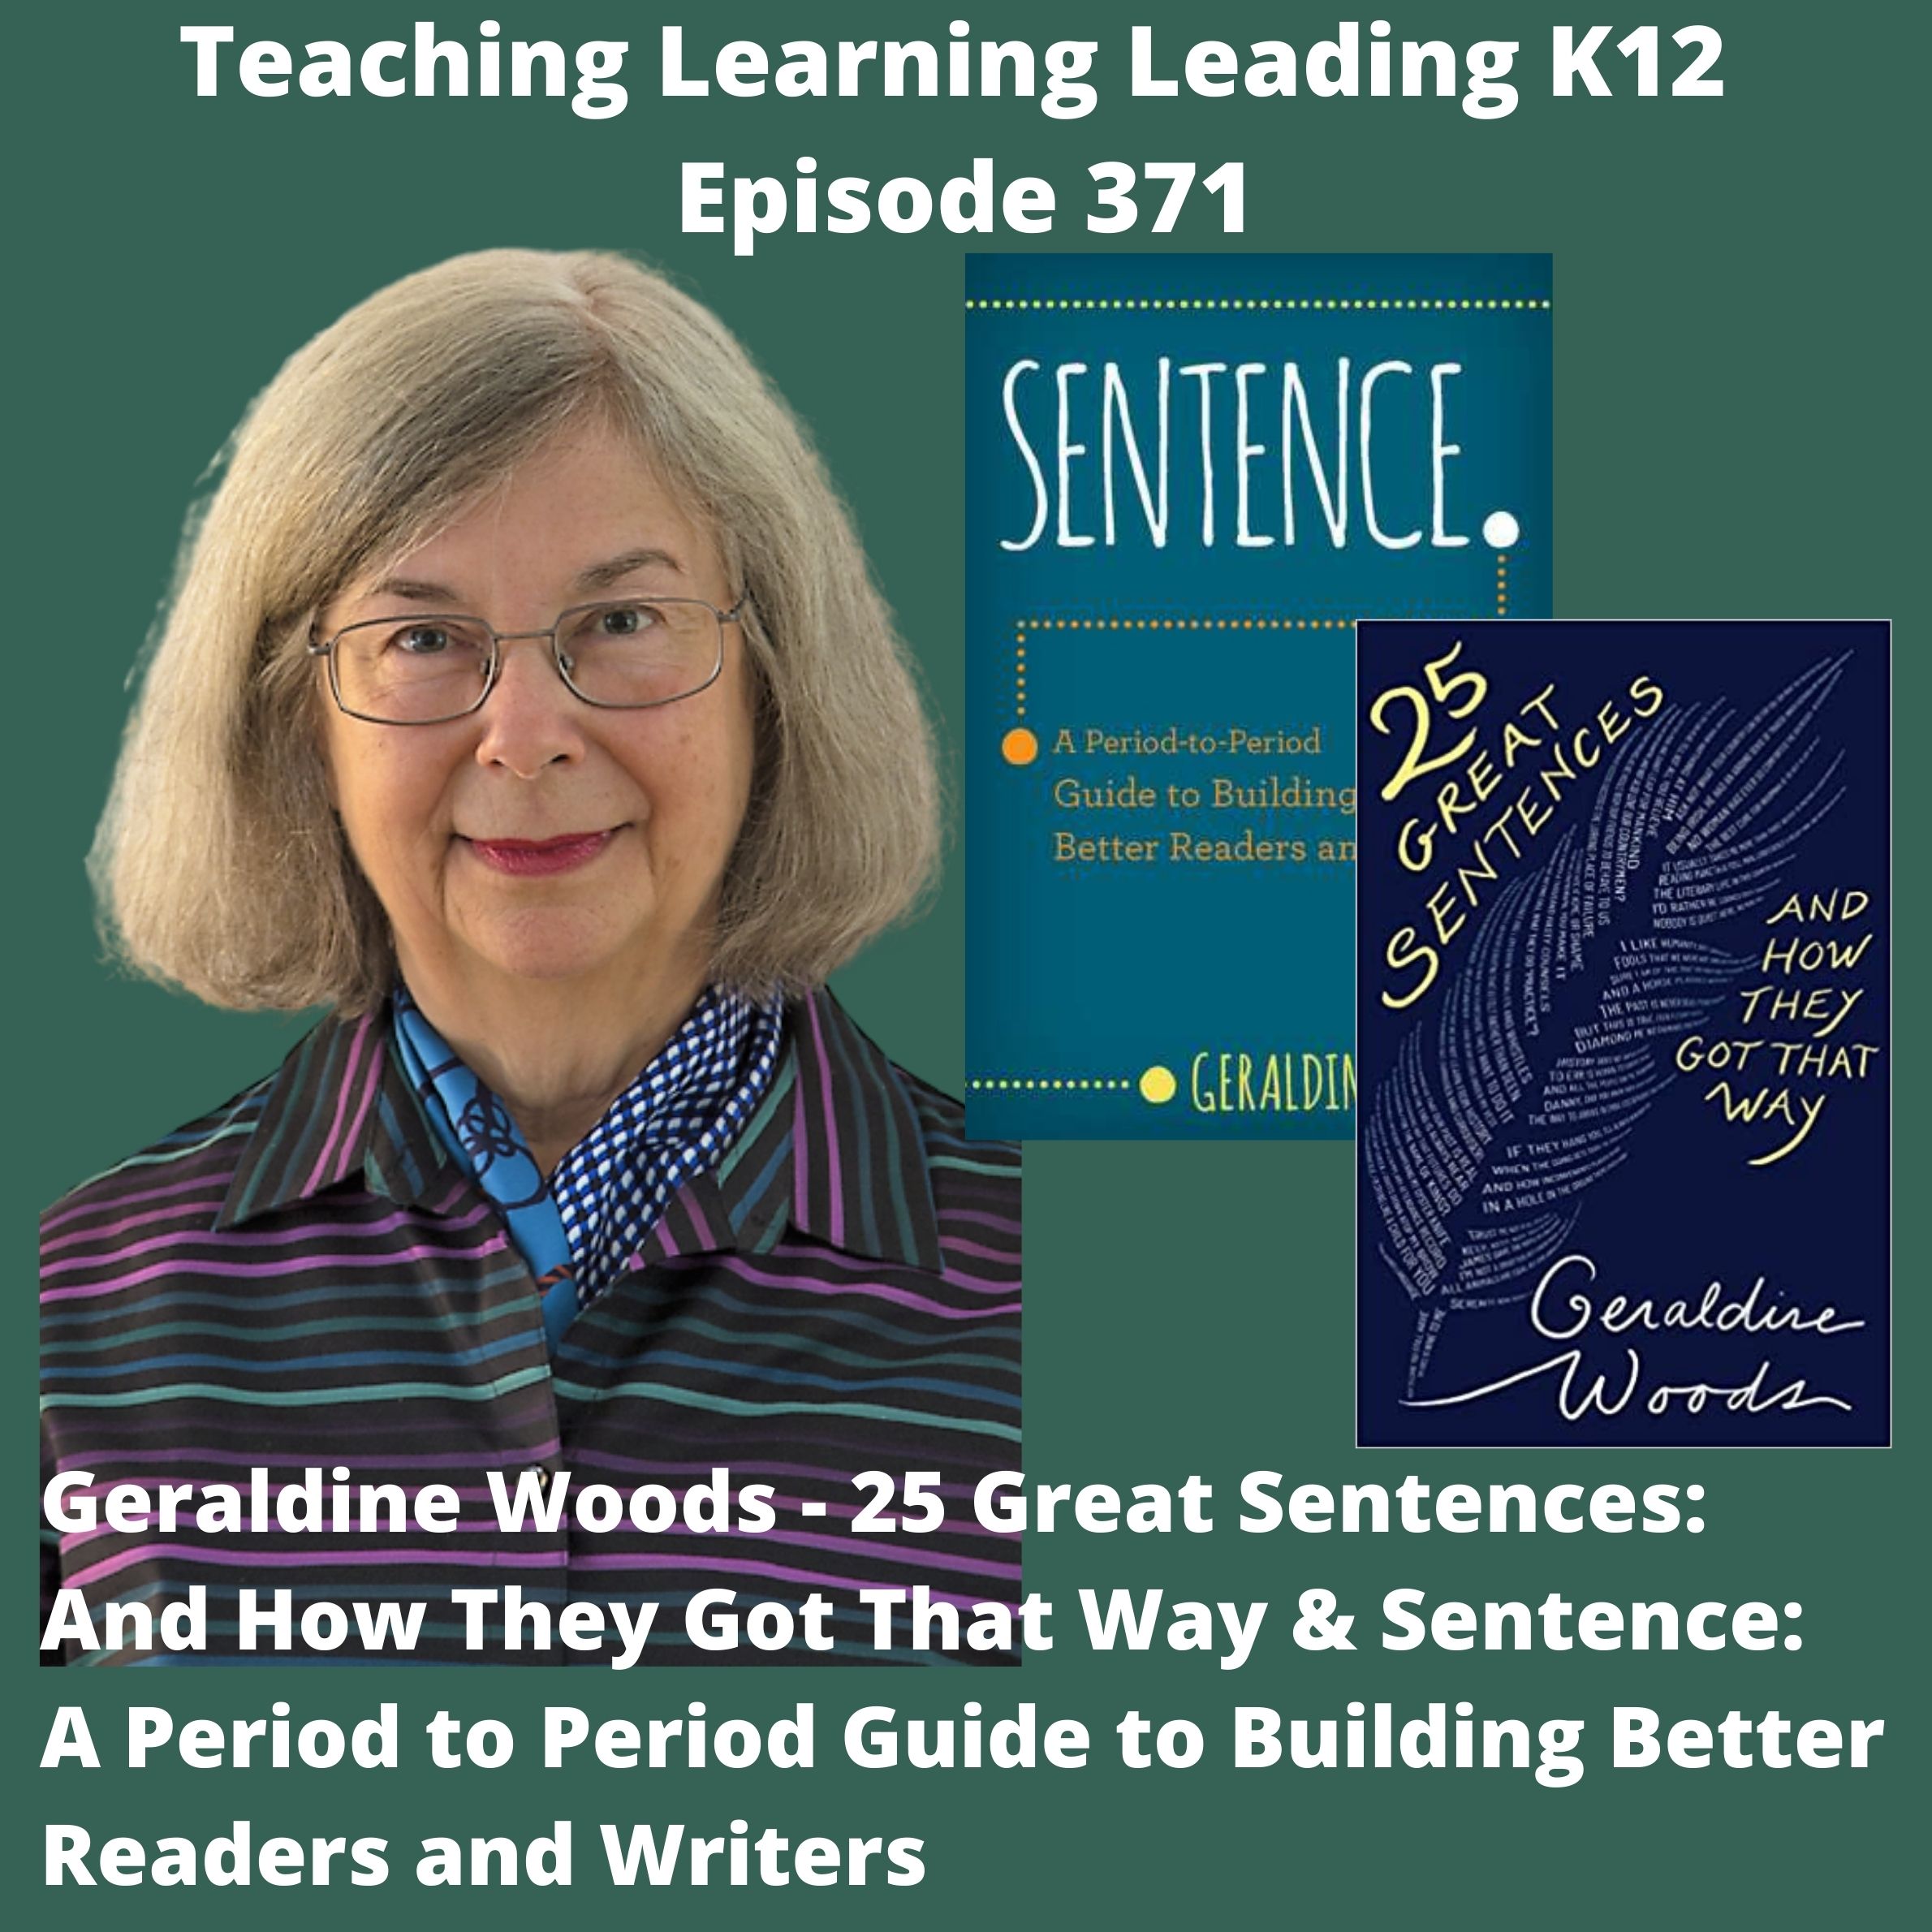 Geraldine Woods - 25 Great Sentences and How They Got That Way & Sentence: A Period to Period Guide to Building Better Readers and Writers - 371